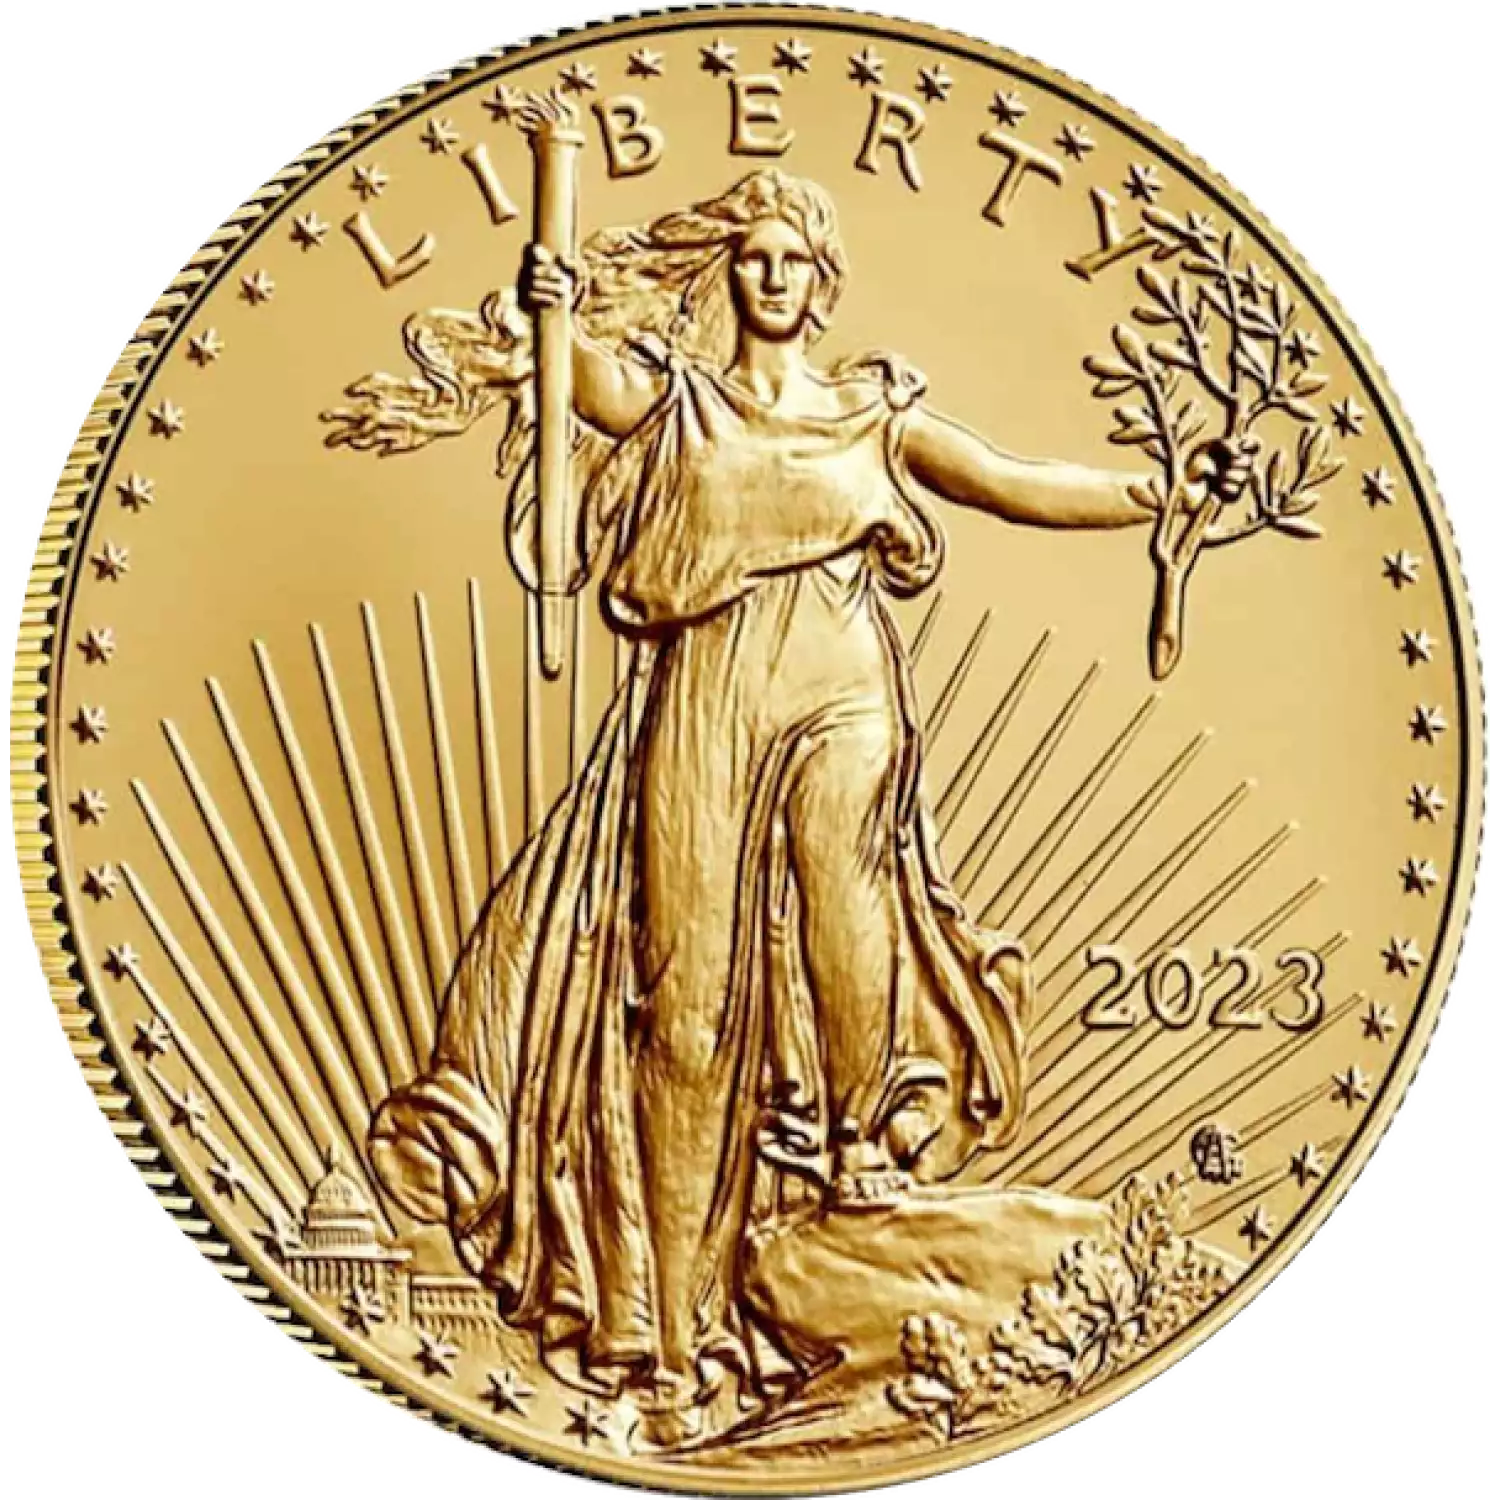 1 oz. Proof American Eagle Gold Coin